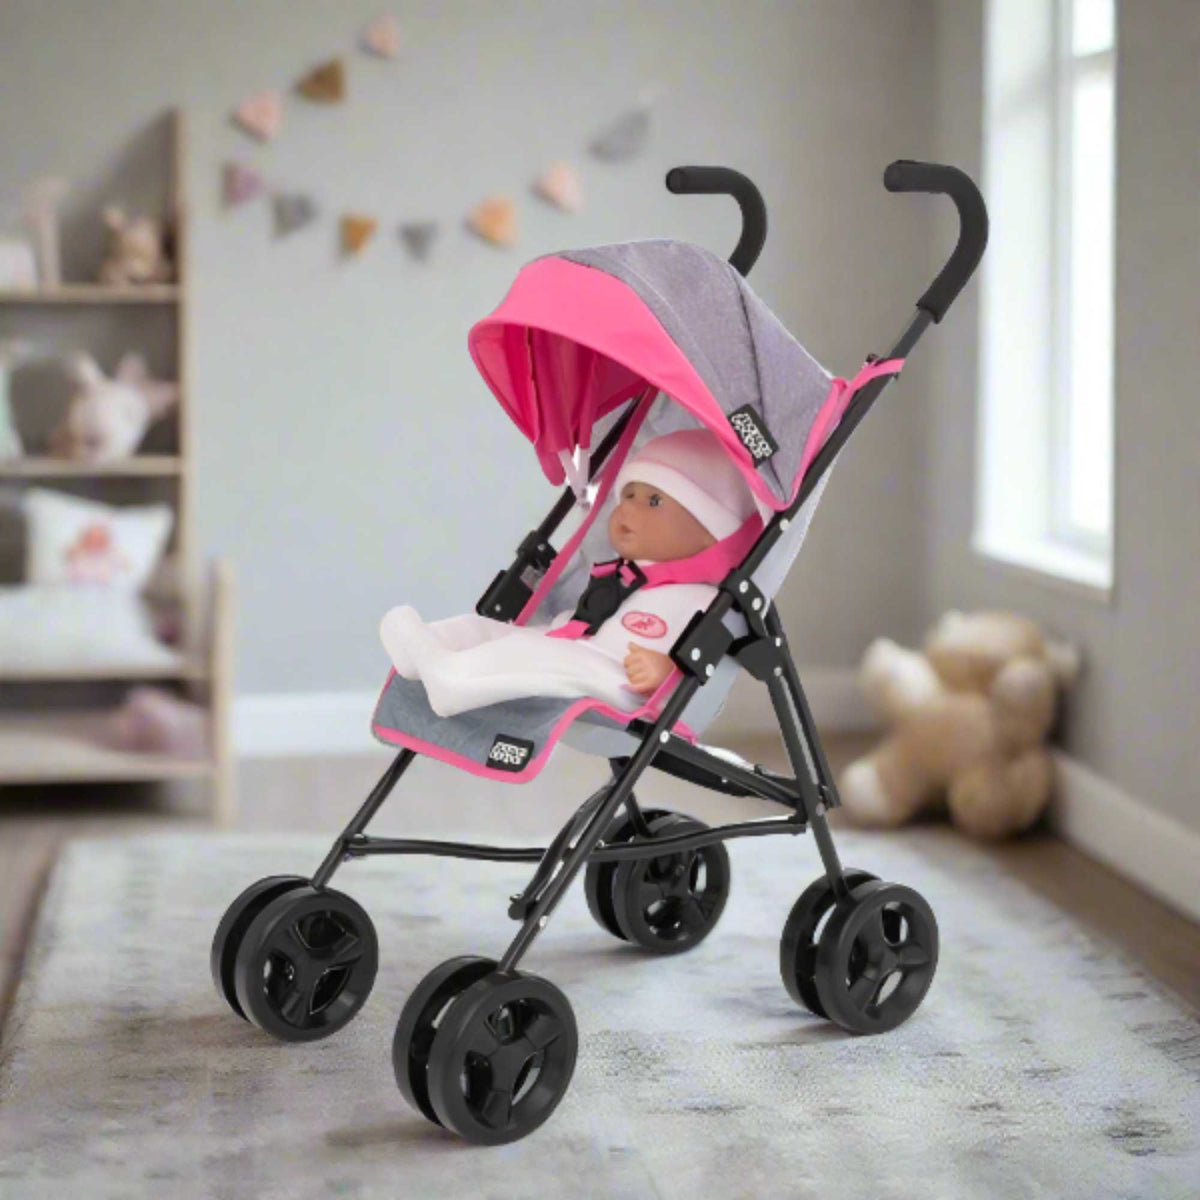 Mamas &amp; Papas Junior Cruise Stroller, designed for children&#39;s imaginative play, featuring a sleek and modern design with sturdy frame and smooth-rolling wheels, perfect for pretend outings with dolls.